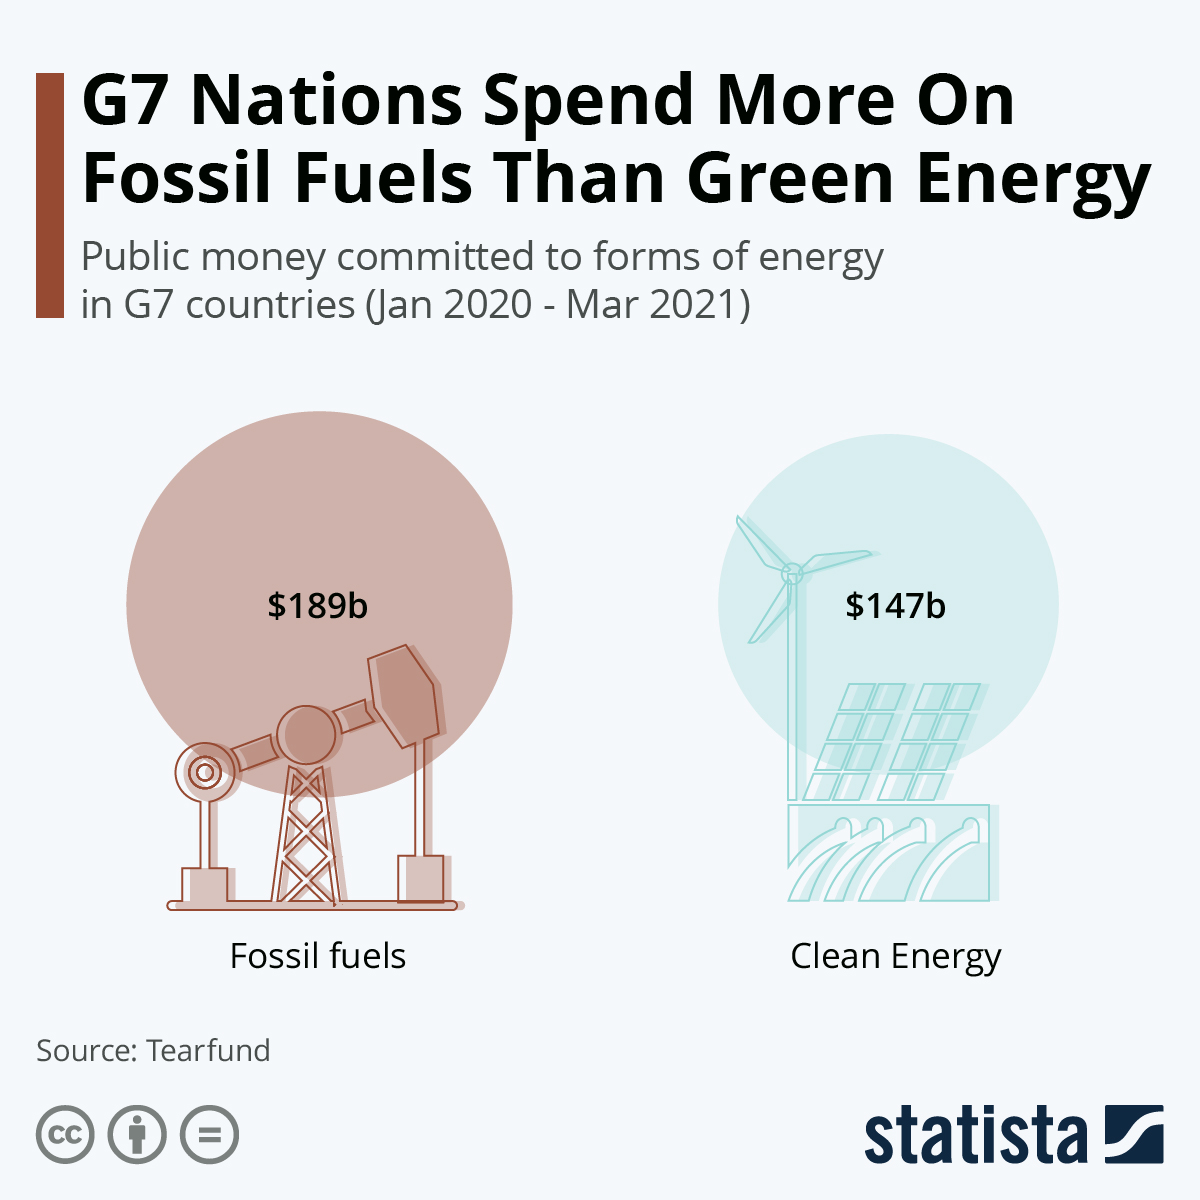 G7 Nations Spend More On Fossil Fuels Than Green Energy